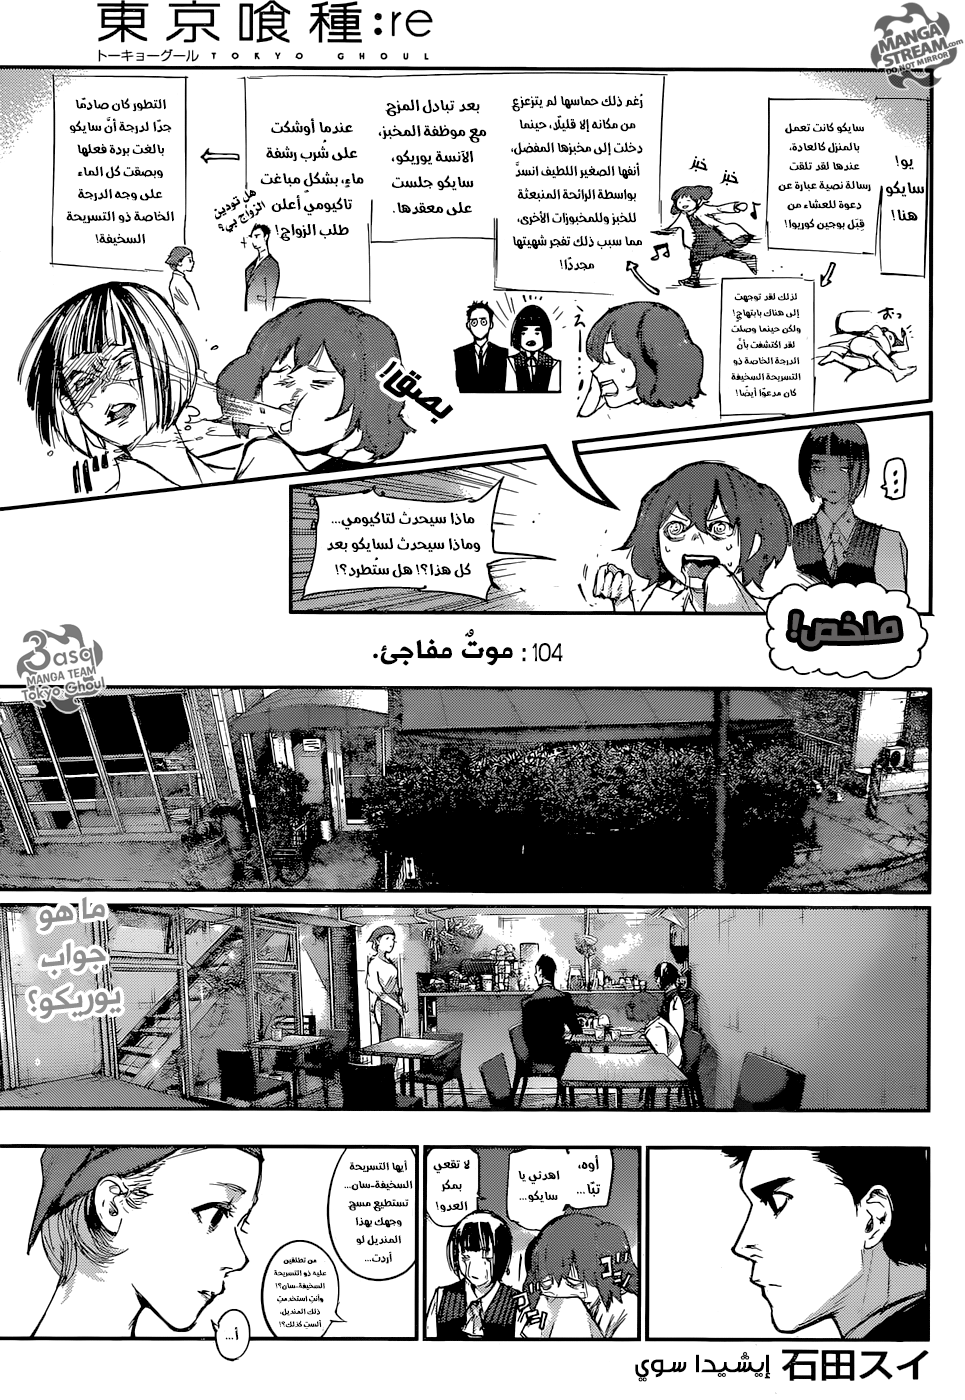 Tokyo Ghoul: Re: Chapter 104 - Page 1